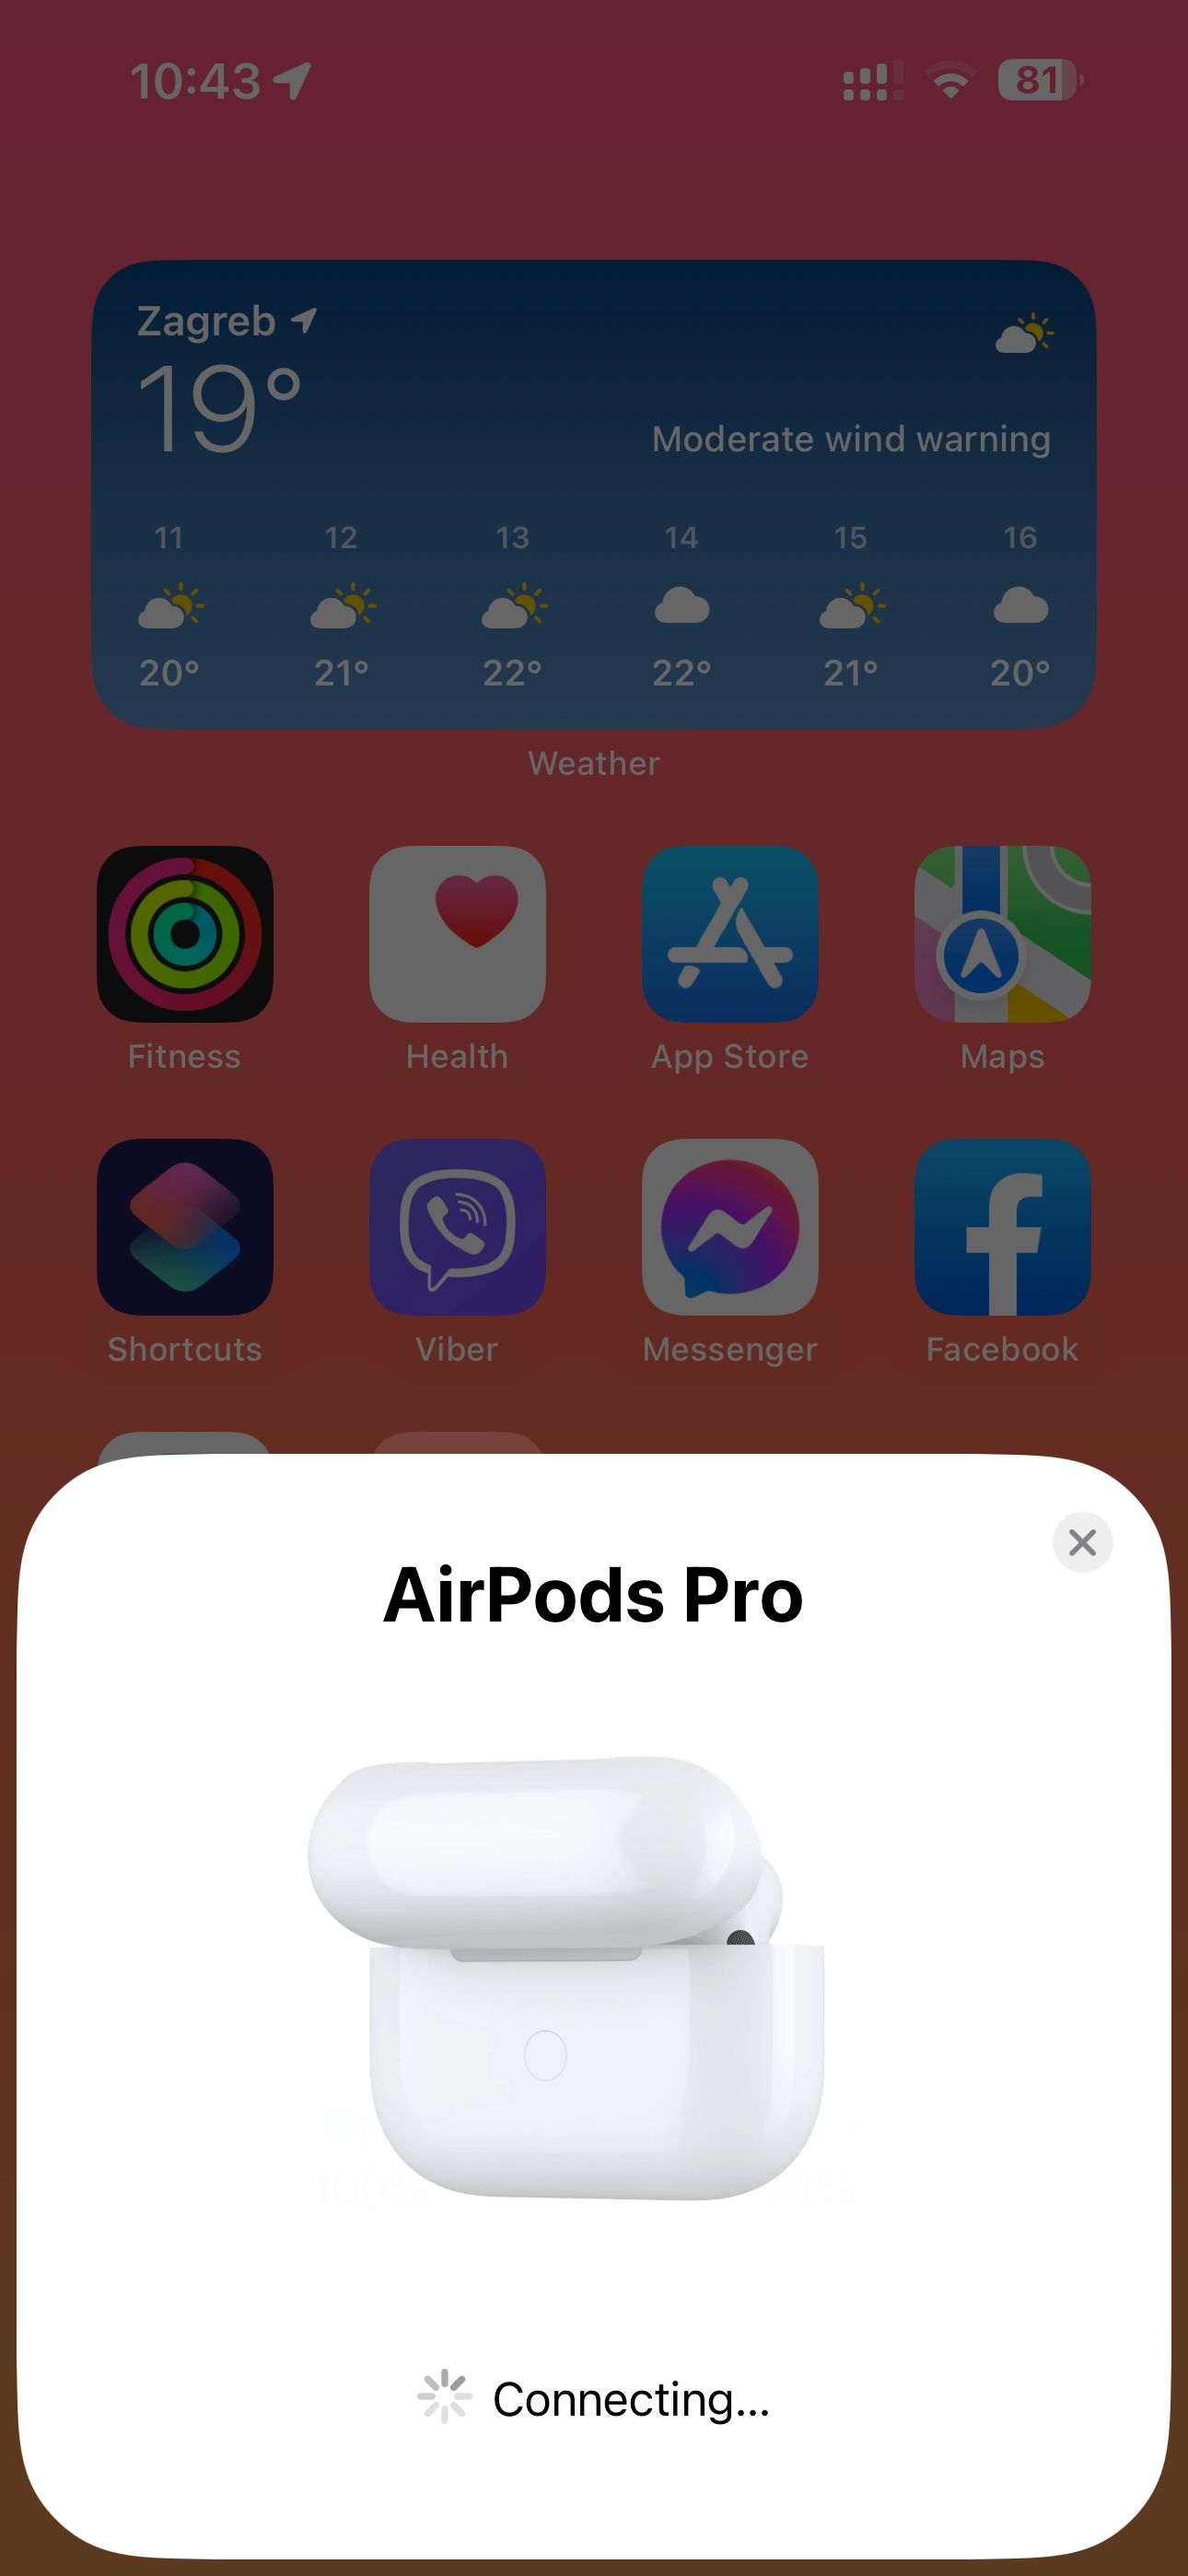 iPhone displaying a card confirming AirPods have been connected